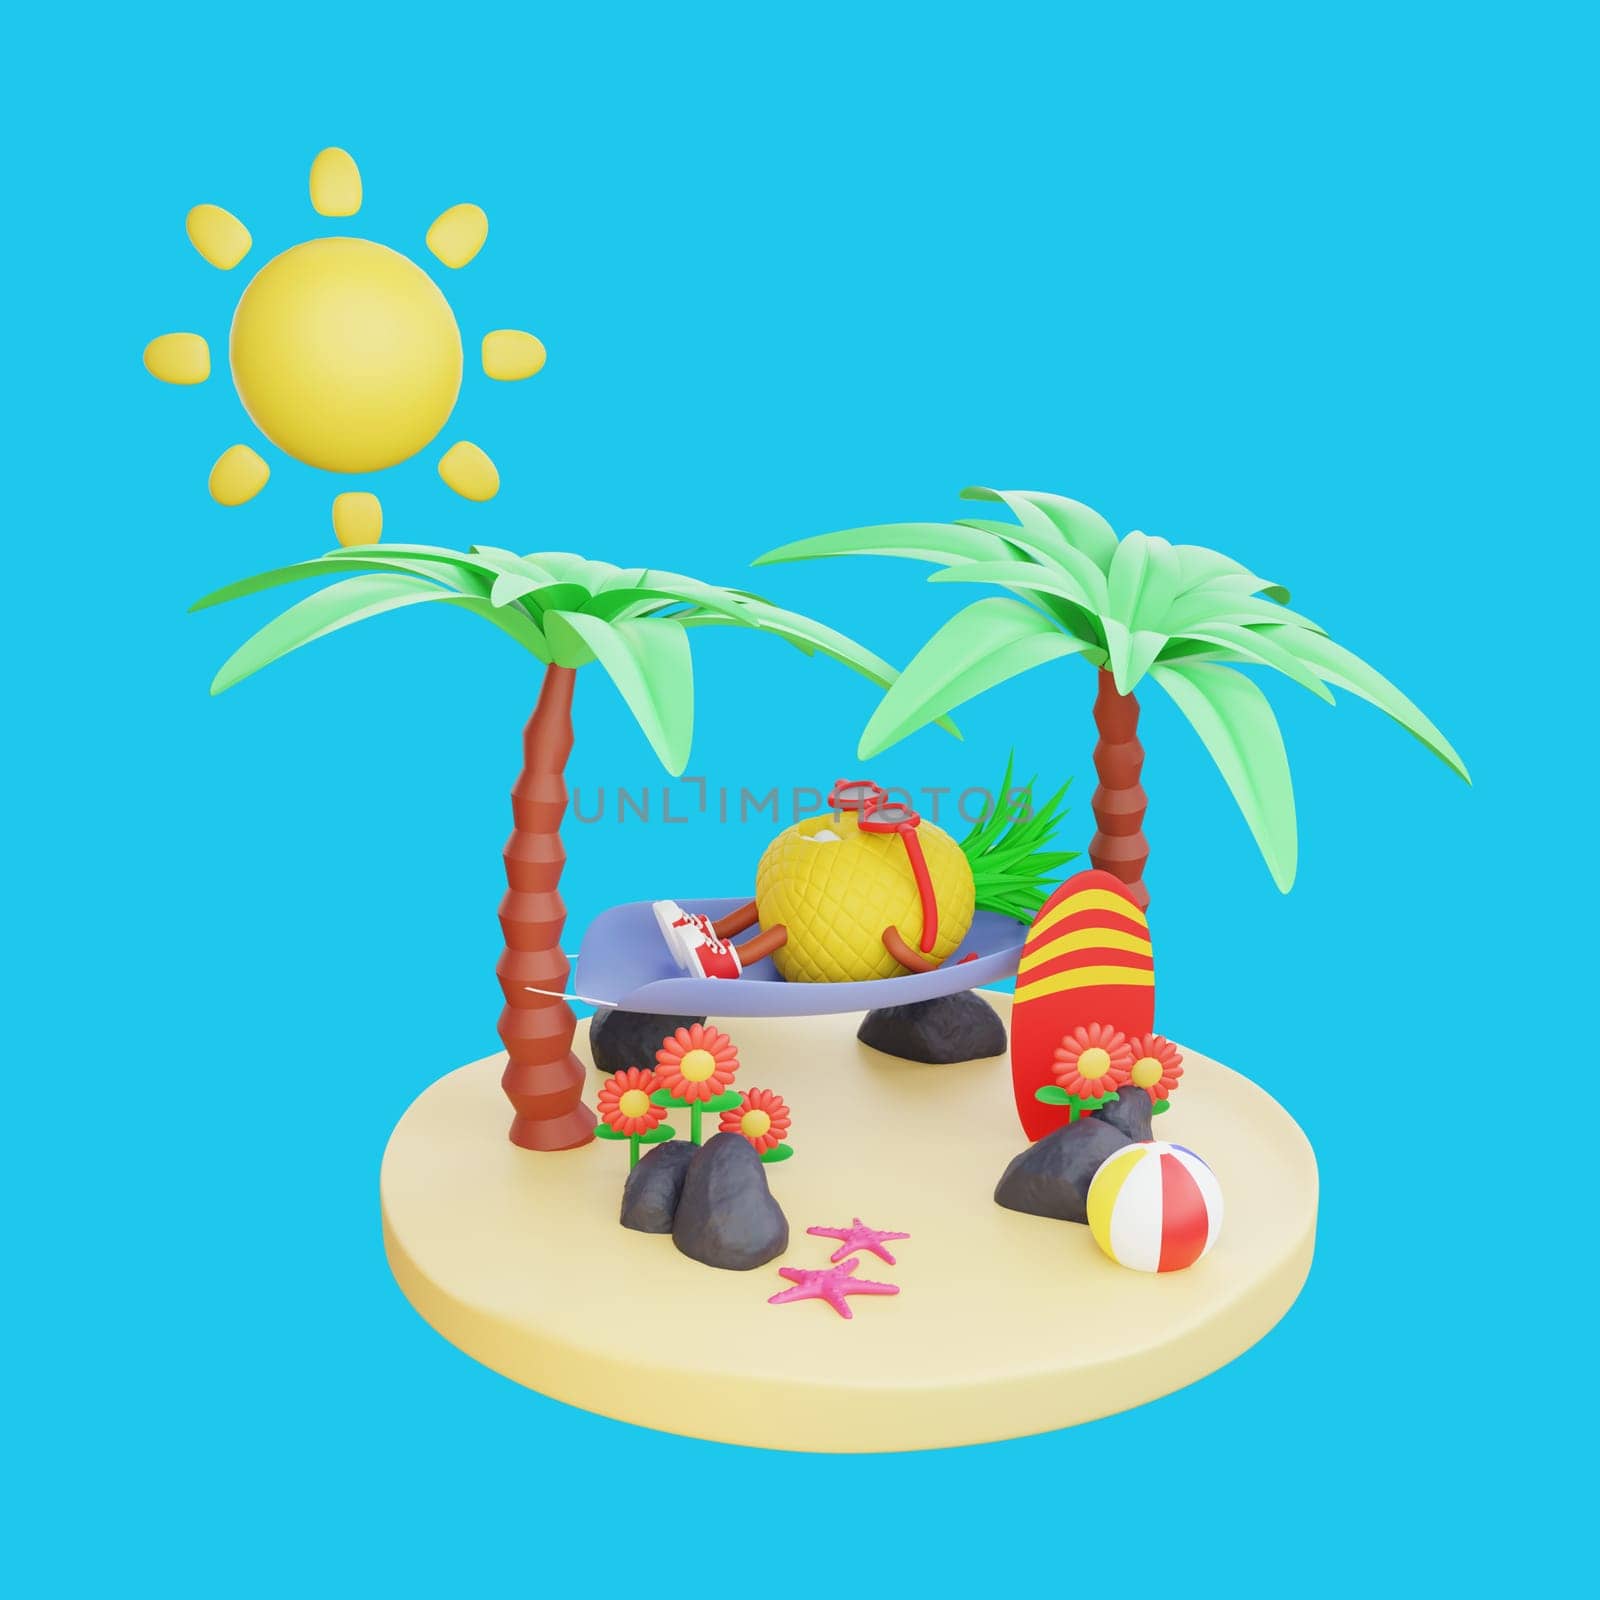 3D render design of a cute pineapple character for summer vacation by Rahmat_Djayusman